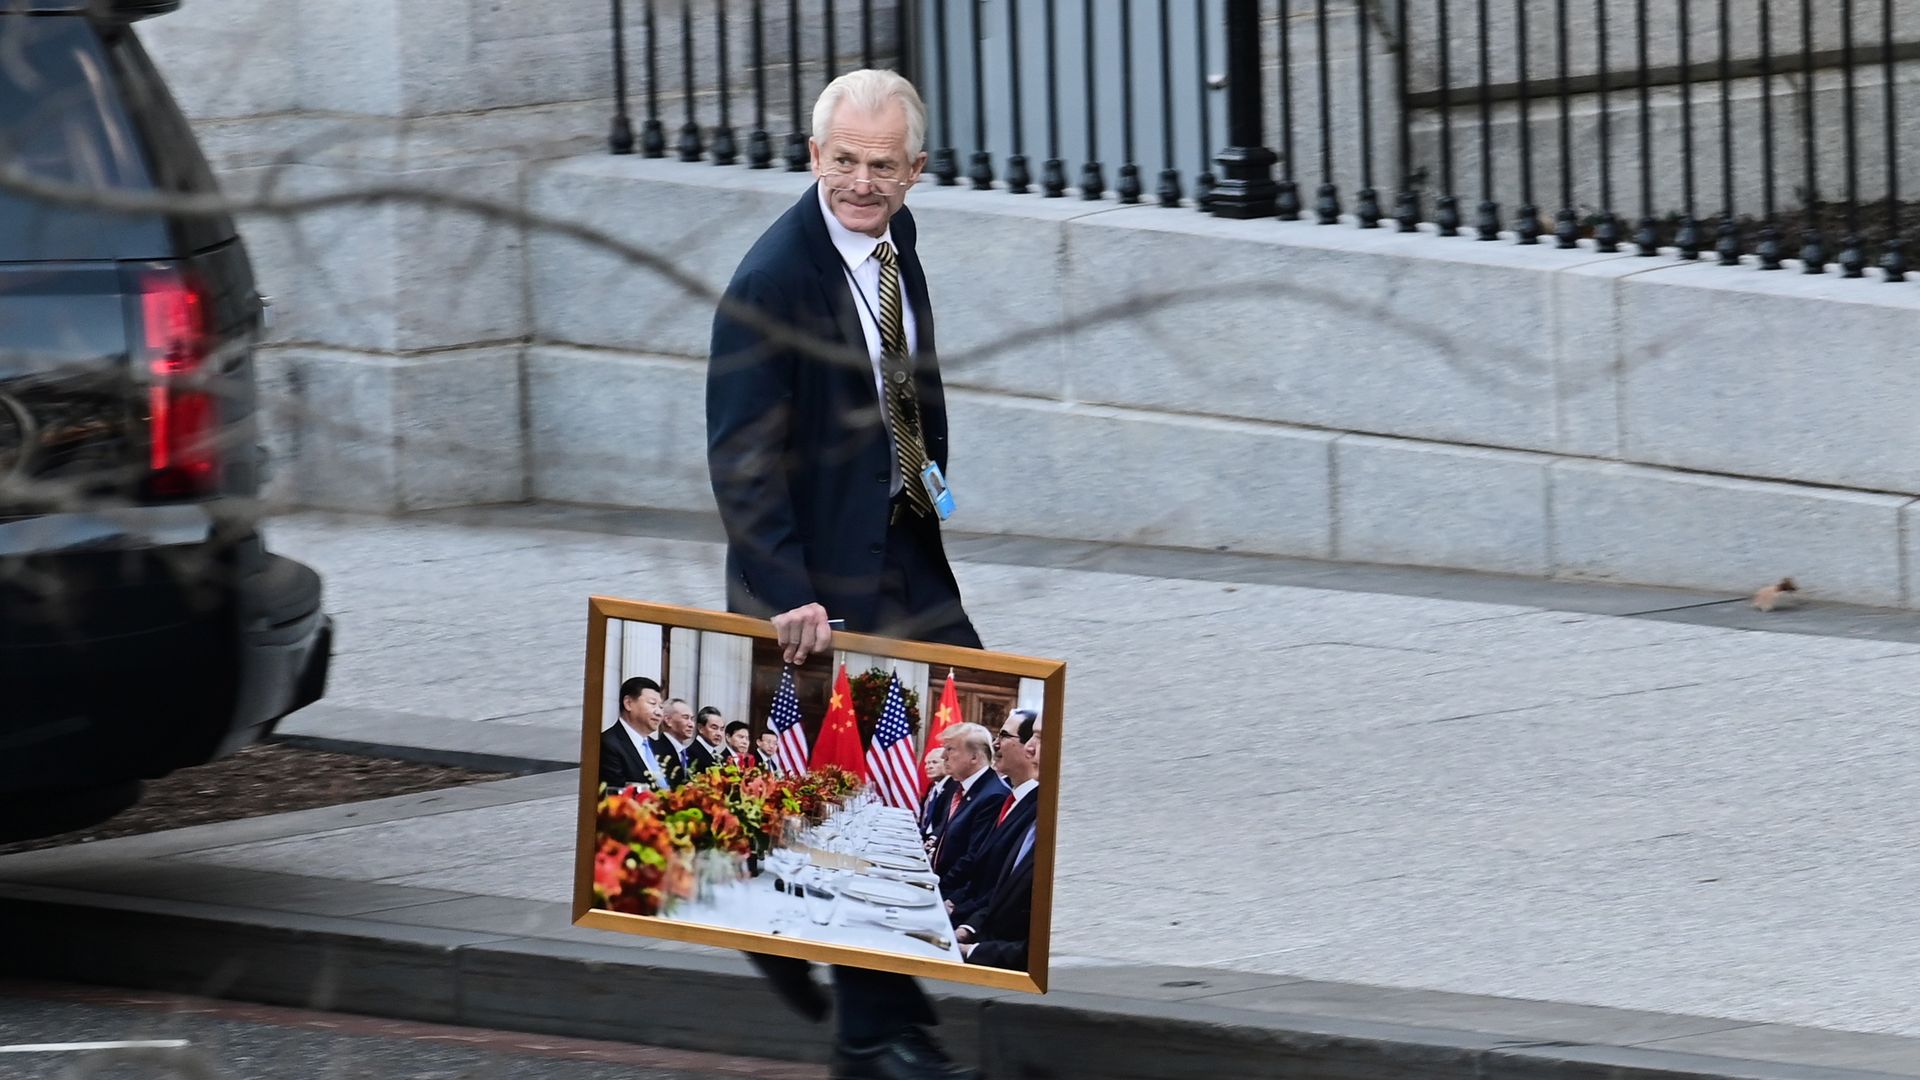 Trade Advisor Peter Navarro is seen carrying a portrait away from the White House.